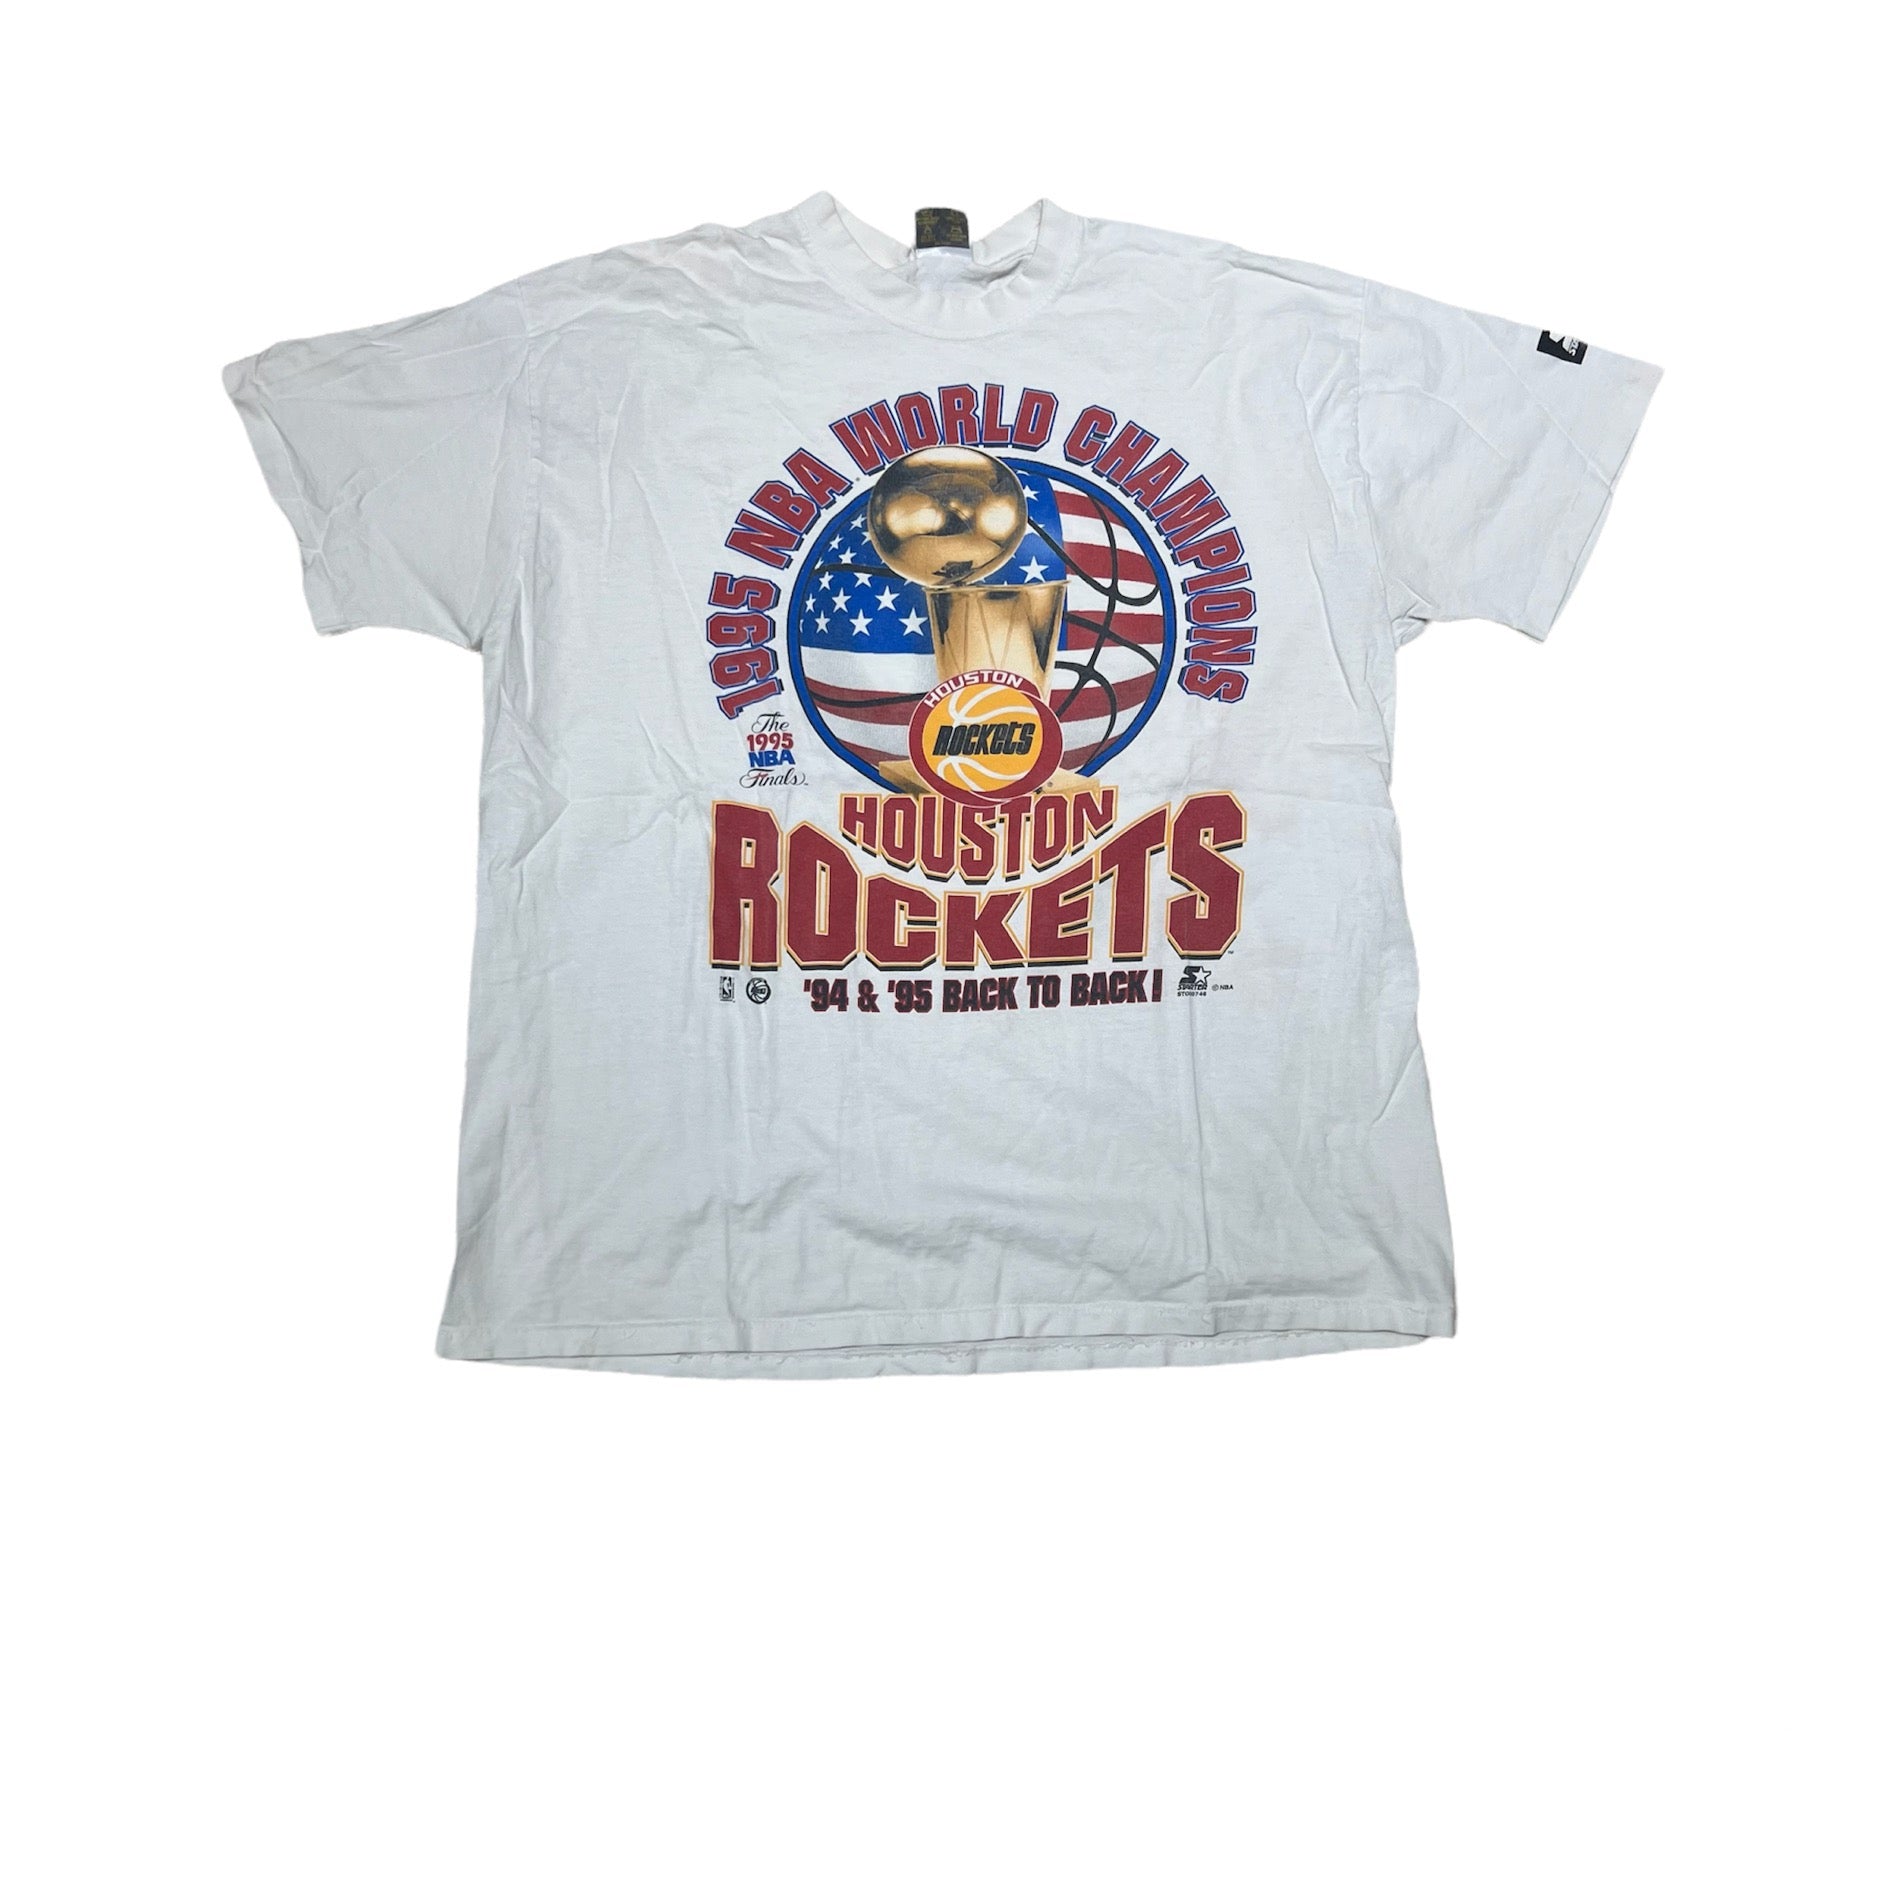 1995 HOUSTON ROCKETS BACK TO BACK CHAMPS TEE